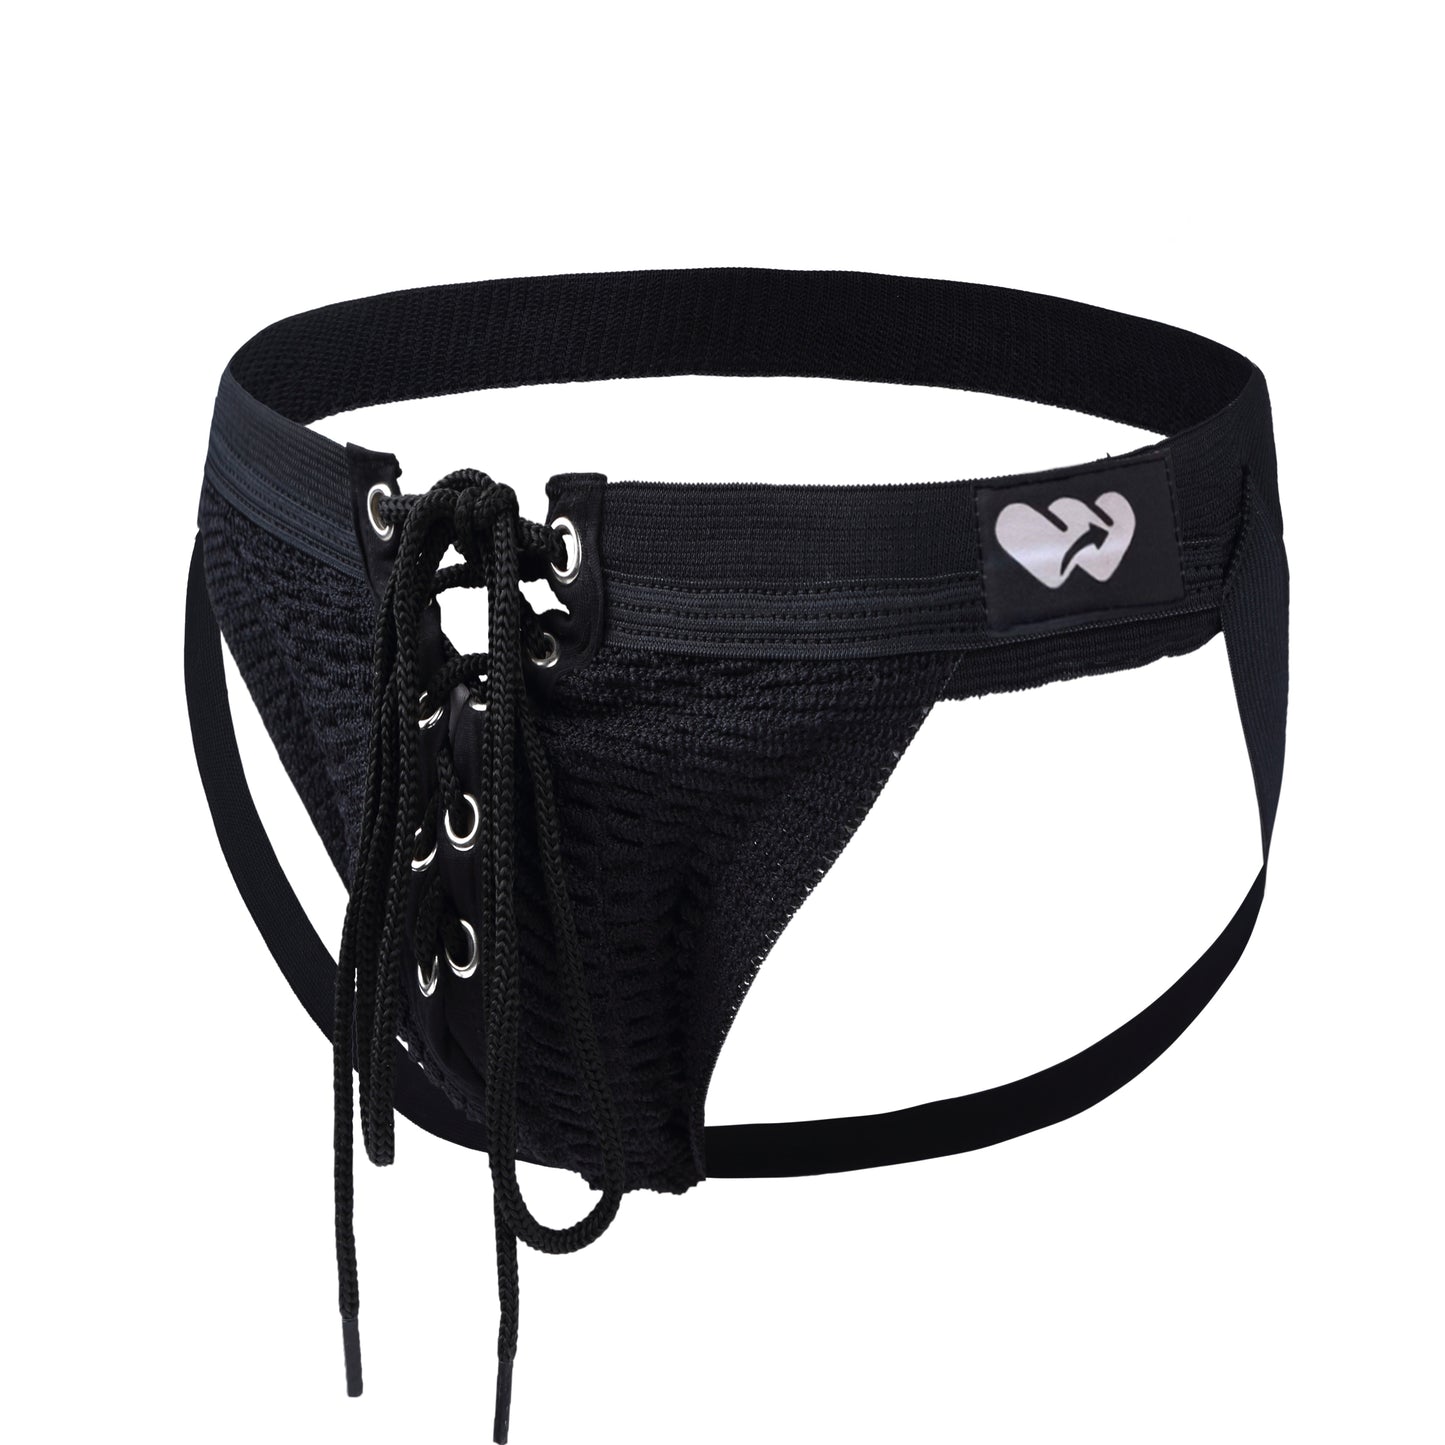 Athletic Supporter Contoured Waistband Lace - Up Front Chain Rings Jockstrap